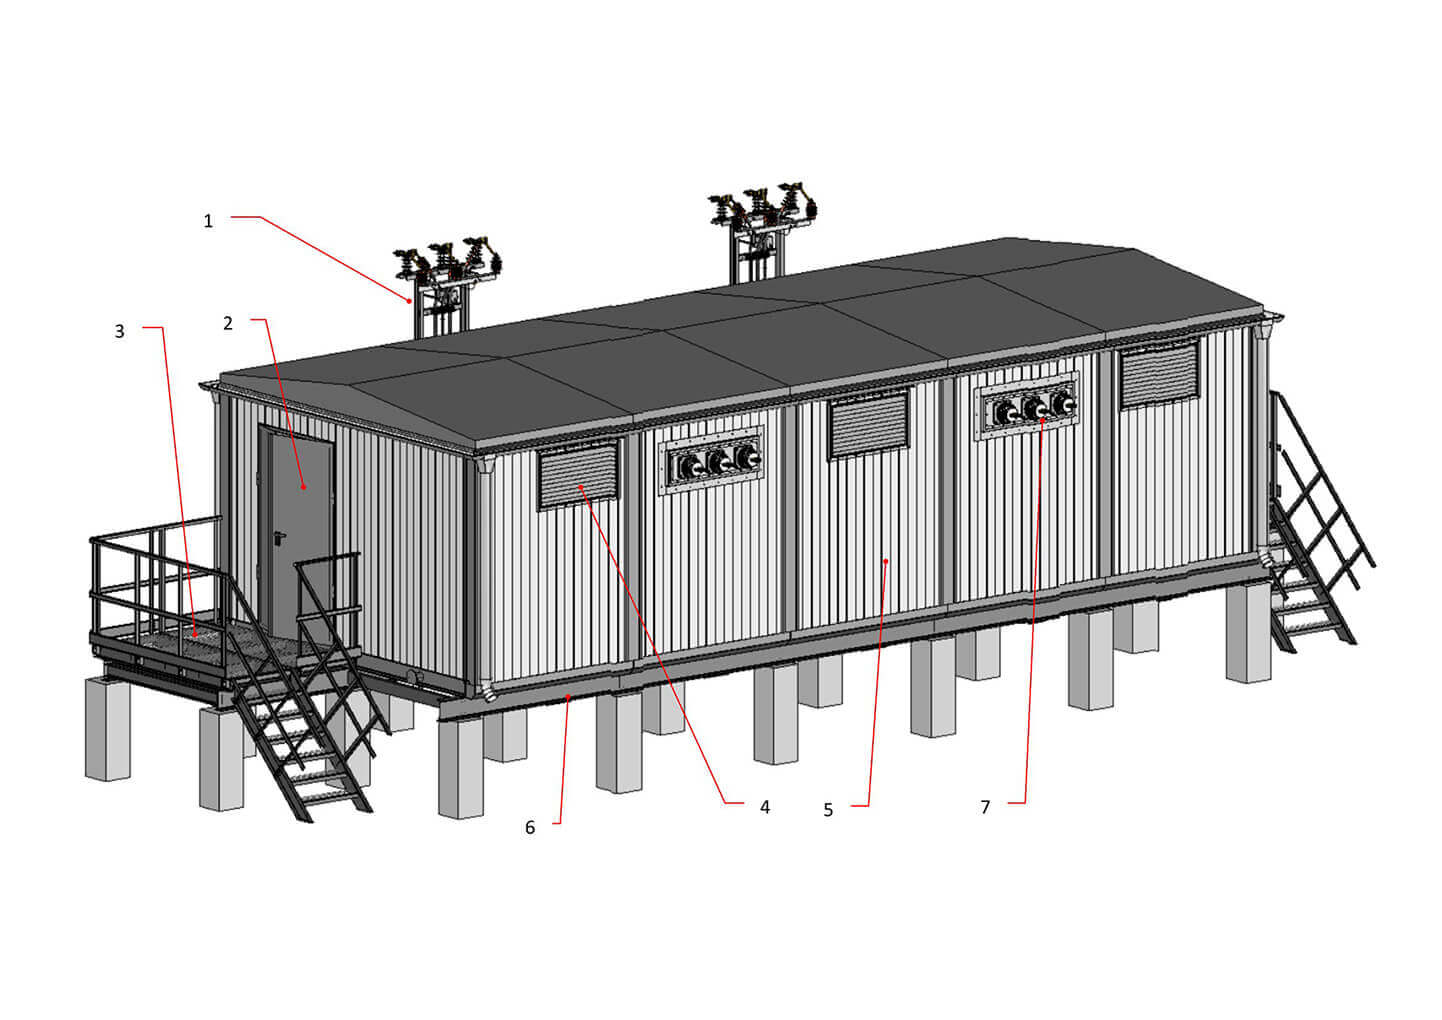 1. Air inlet 2. Entrance door 3. Service area with fences 4. Ventilation openings 5. Block-module 6. Roof rack 7. Bus inlet